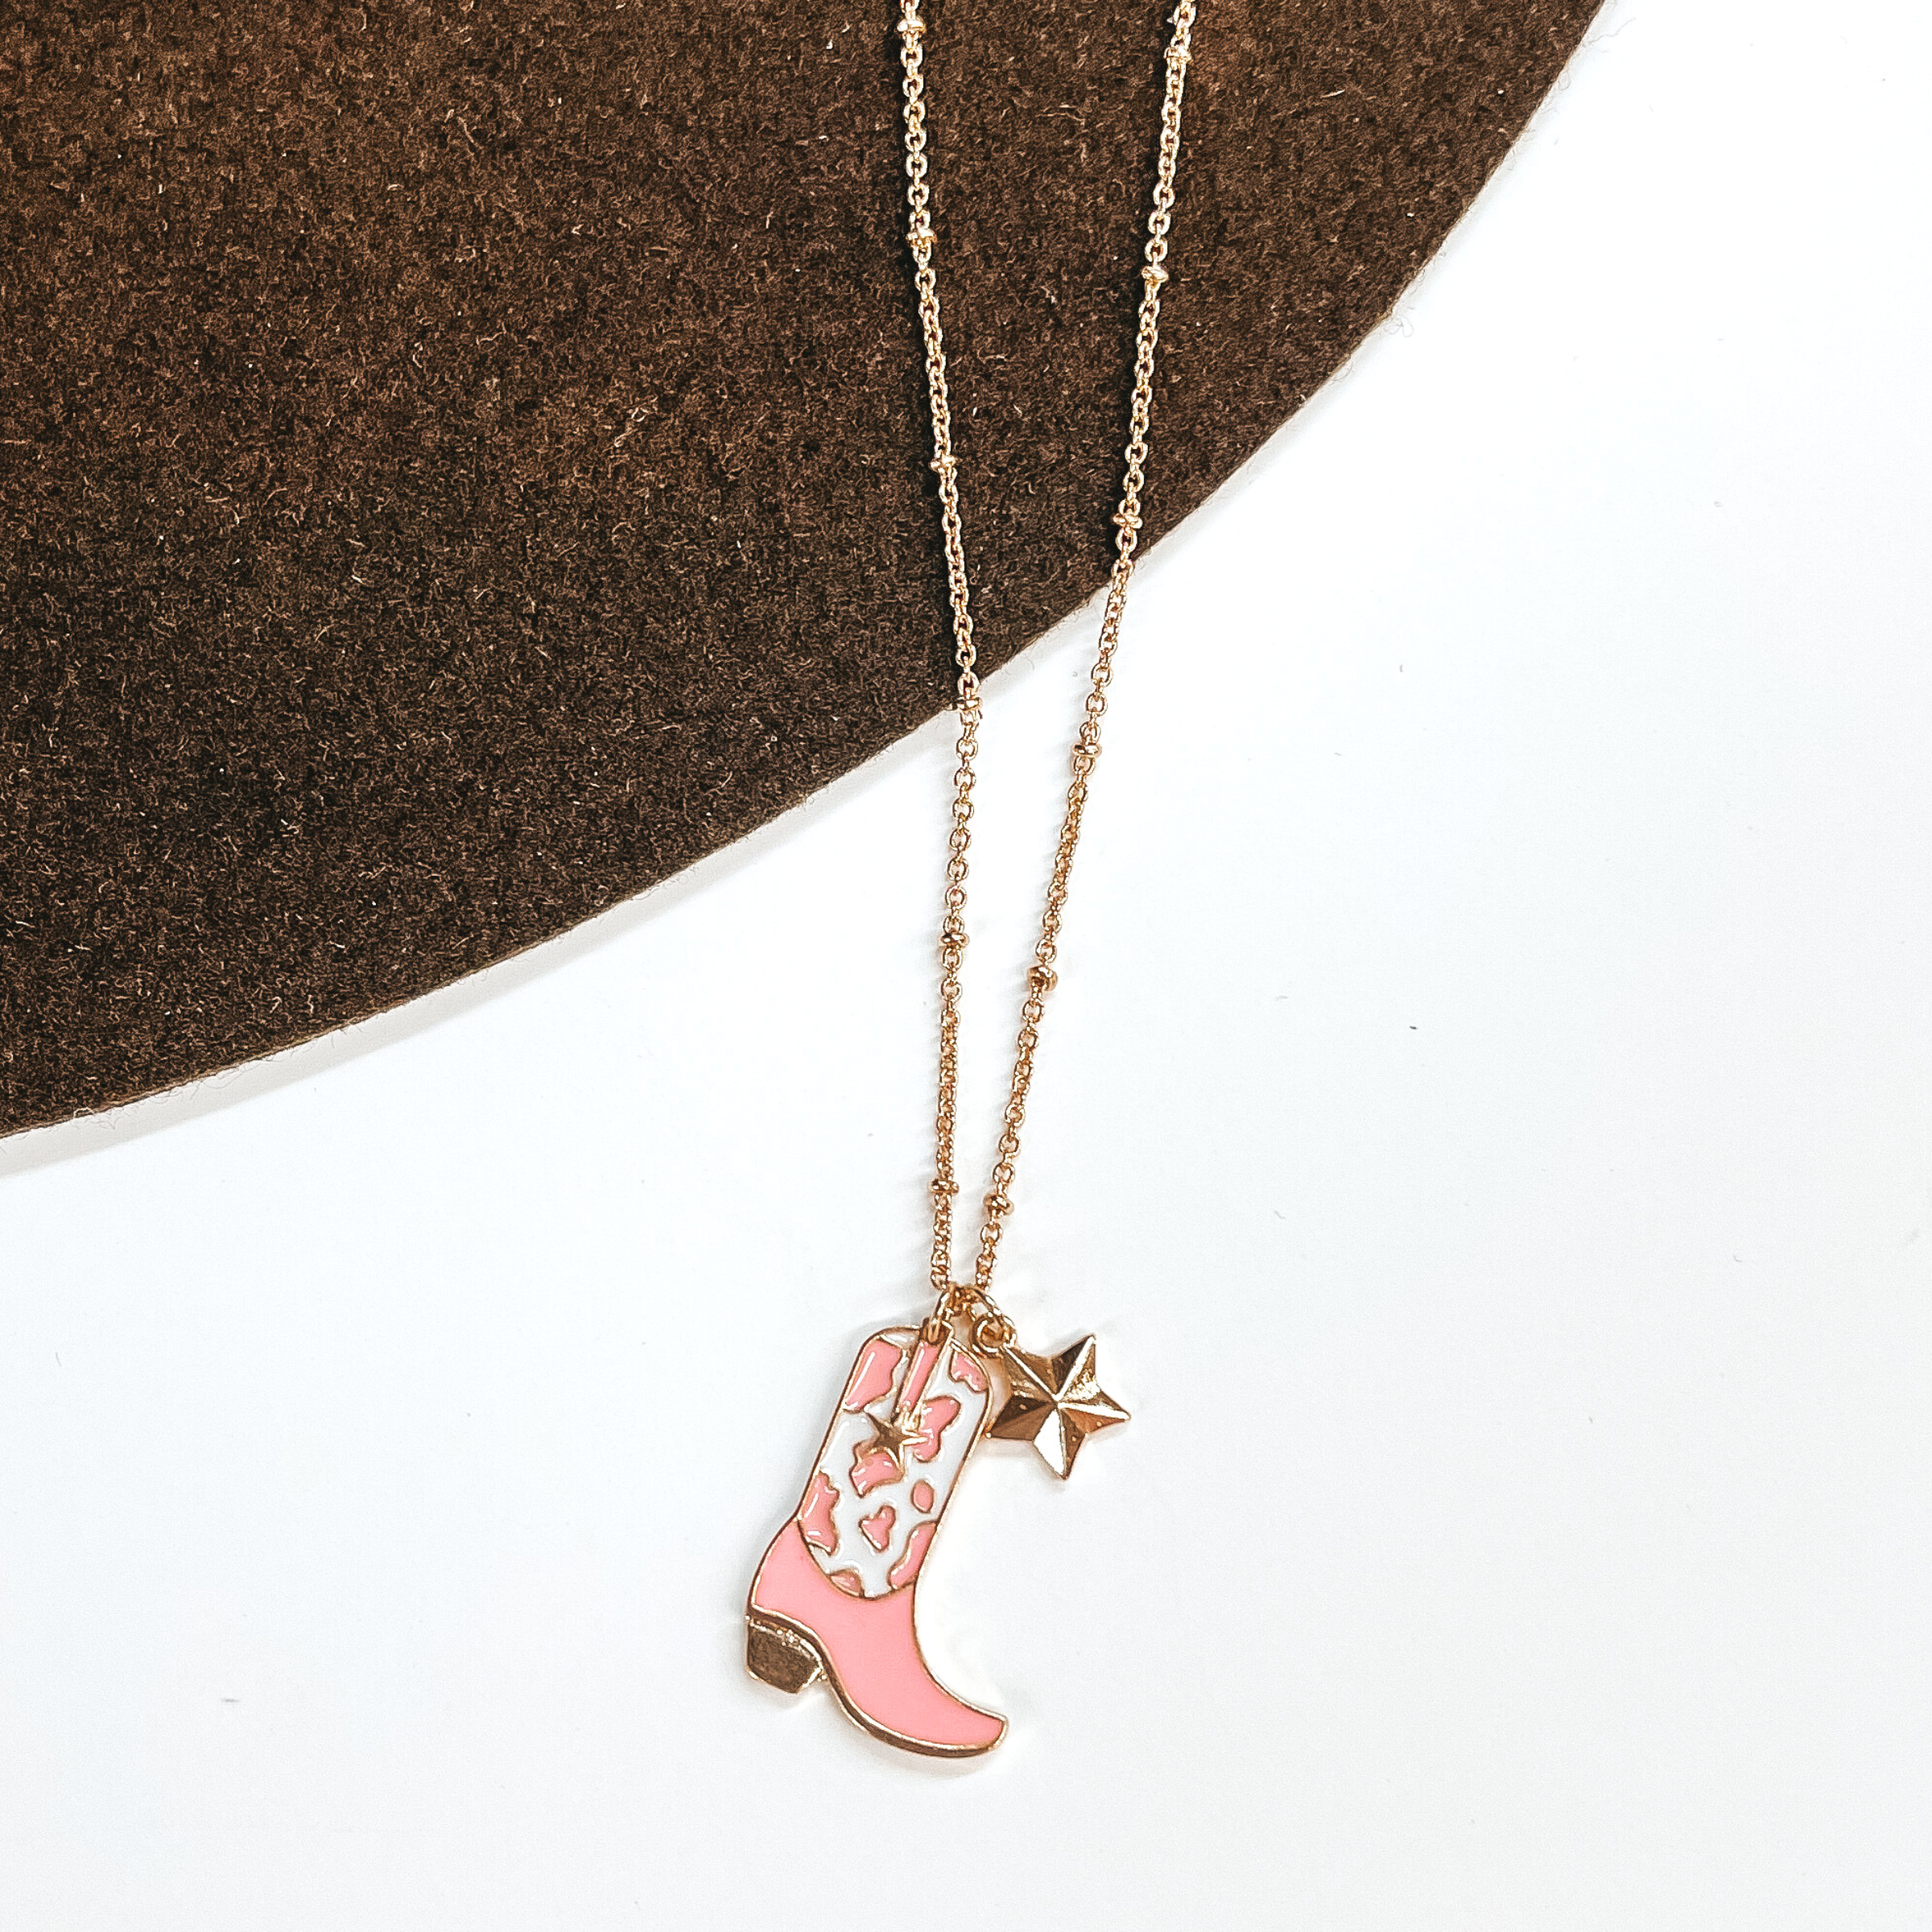 Gold chain necklace with a gold star charm and a white and pink cow print boot charm. This necklace is pictured on a white and brown background. 